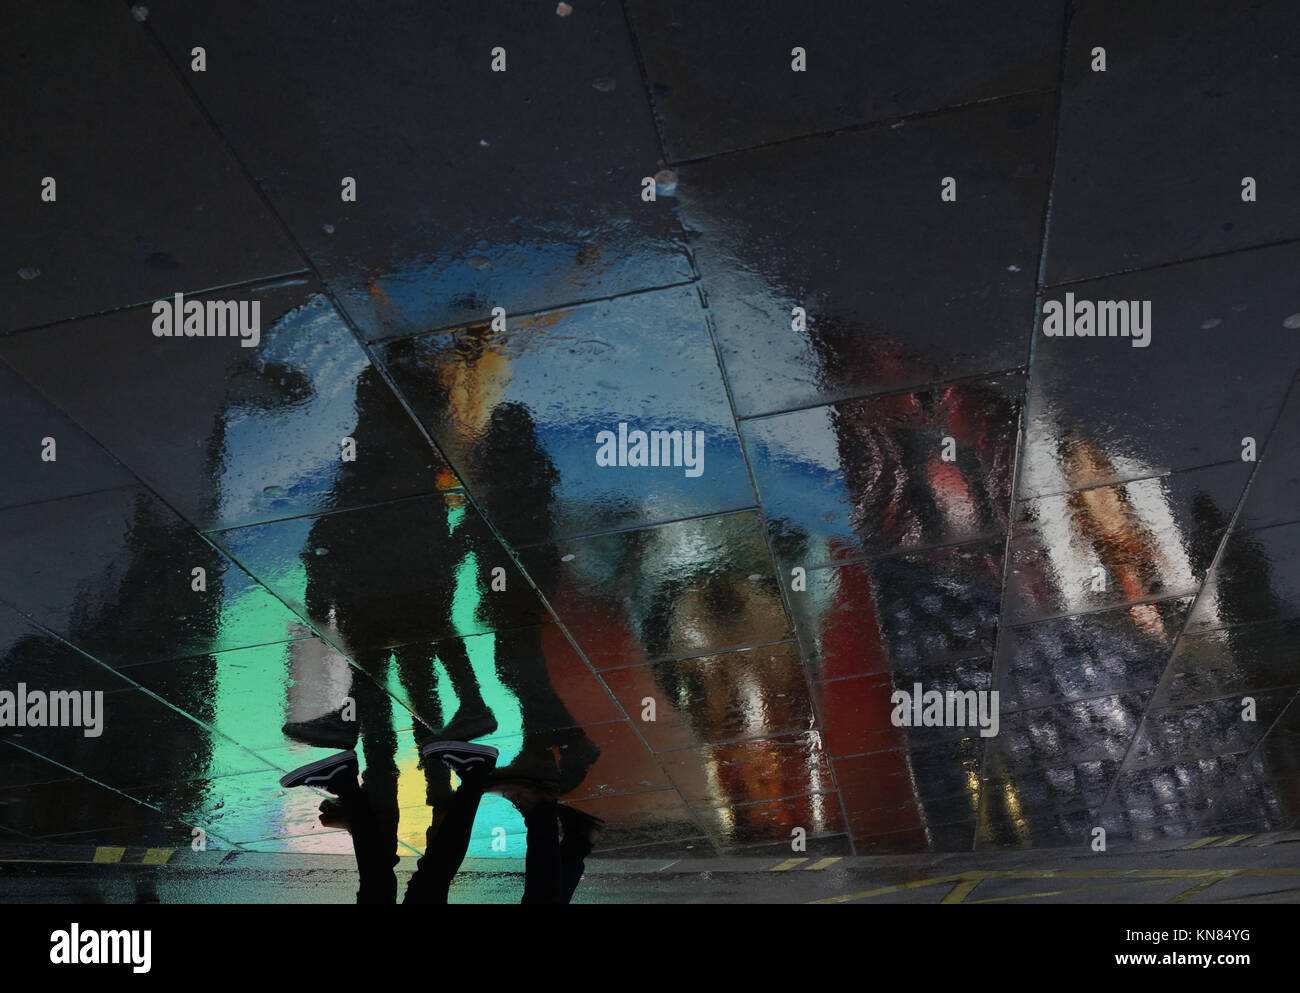 London, UK. 10 December, 2017. Snow predictably turned to rain in Piccadilly Circus, central London leaving shoppers and tourists to wander among the reflections of Piccadilly Circus’s new electronic billboards. The billboards were installed in October 2017 and react to external factors such as the weather. Roland Phillips/Alamy Live News. Stock Photo